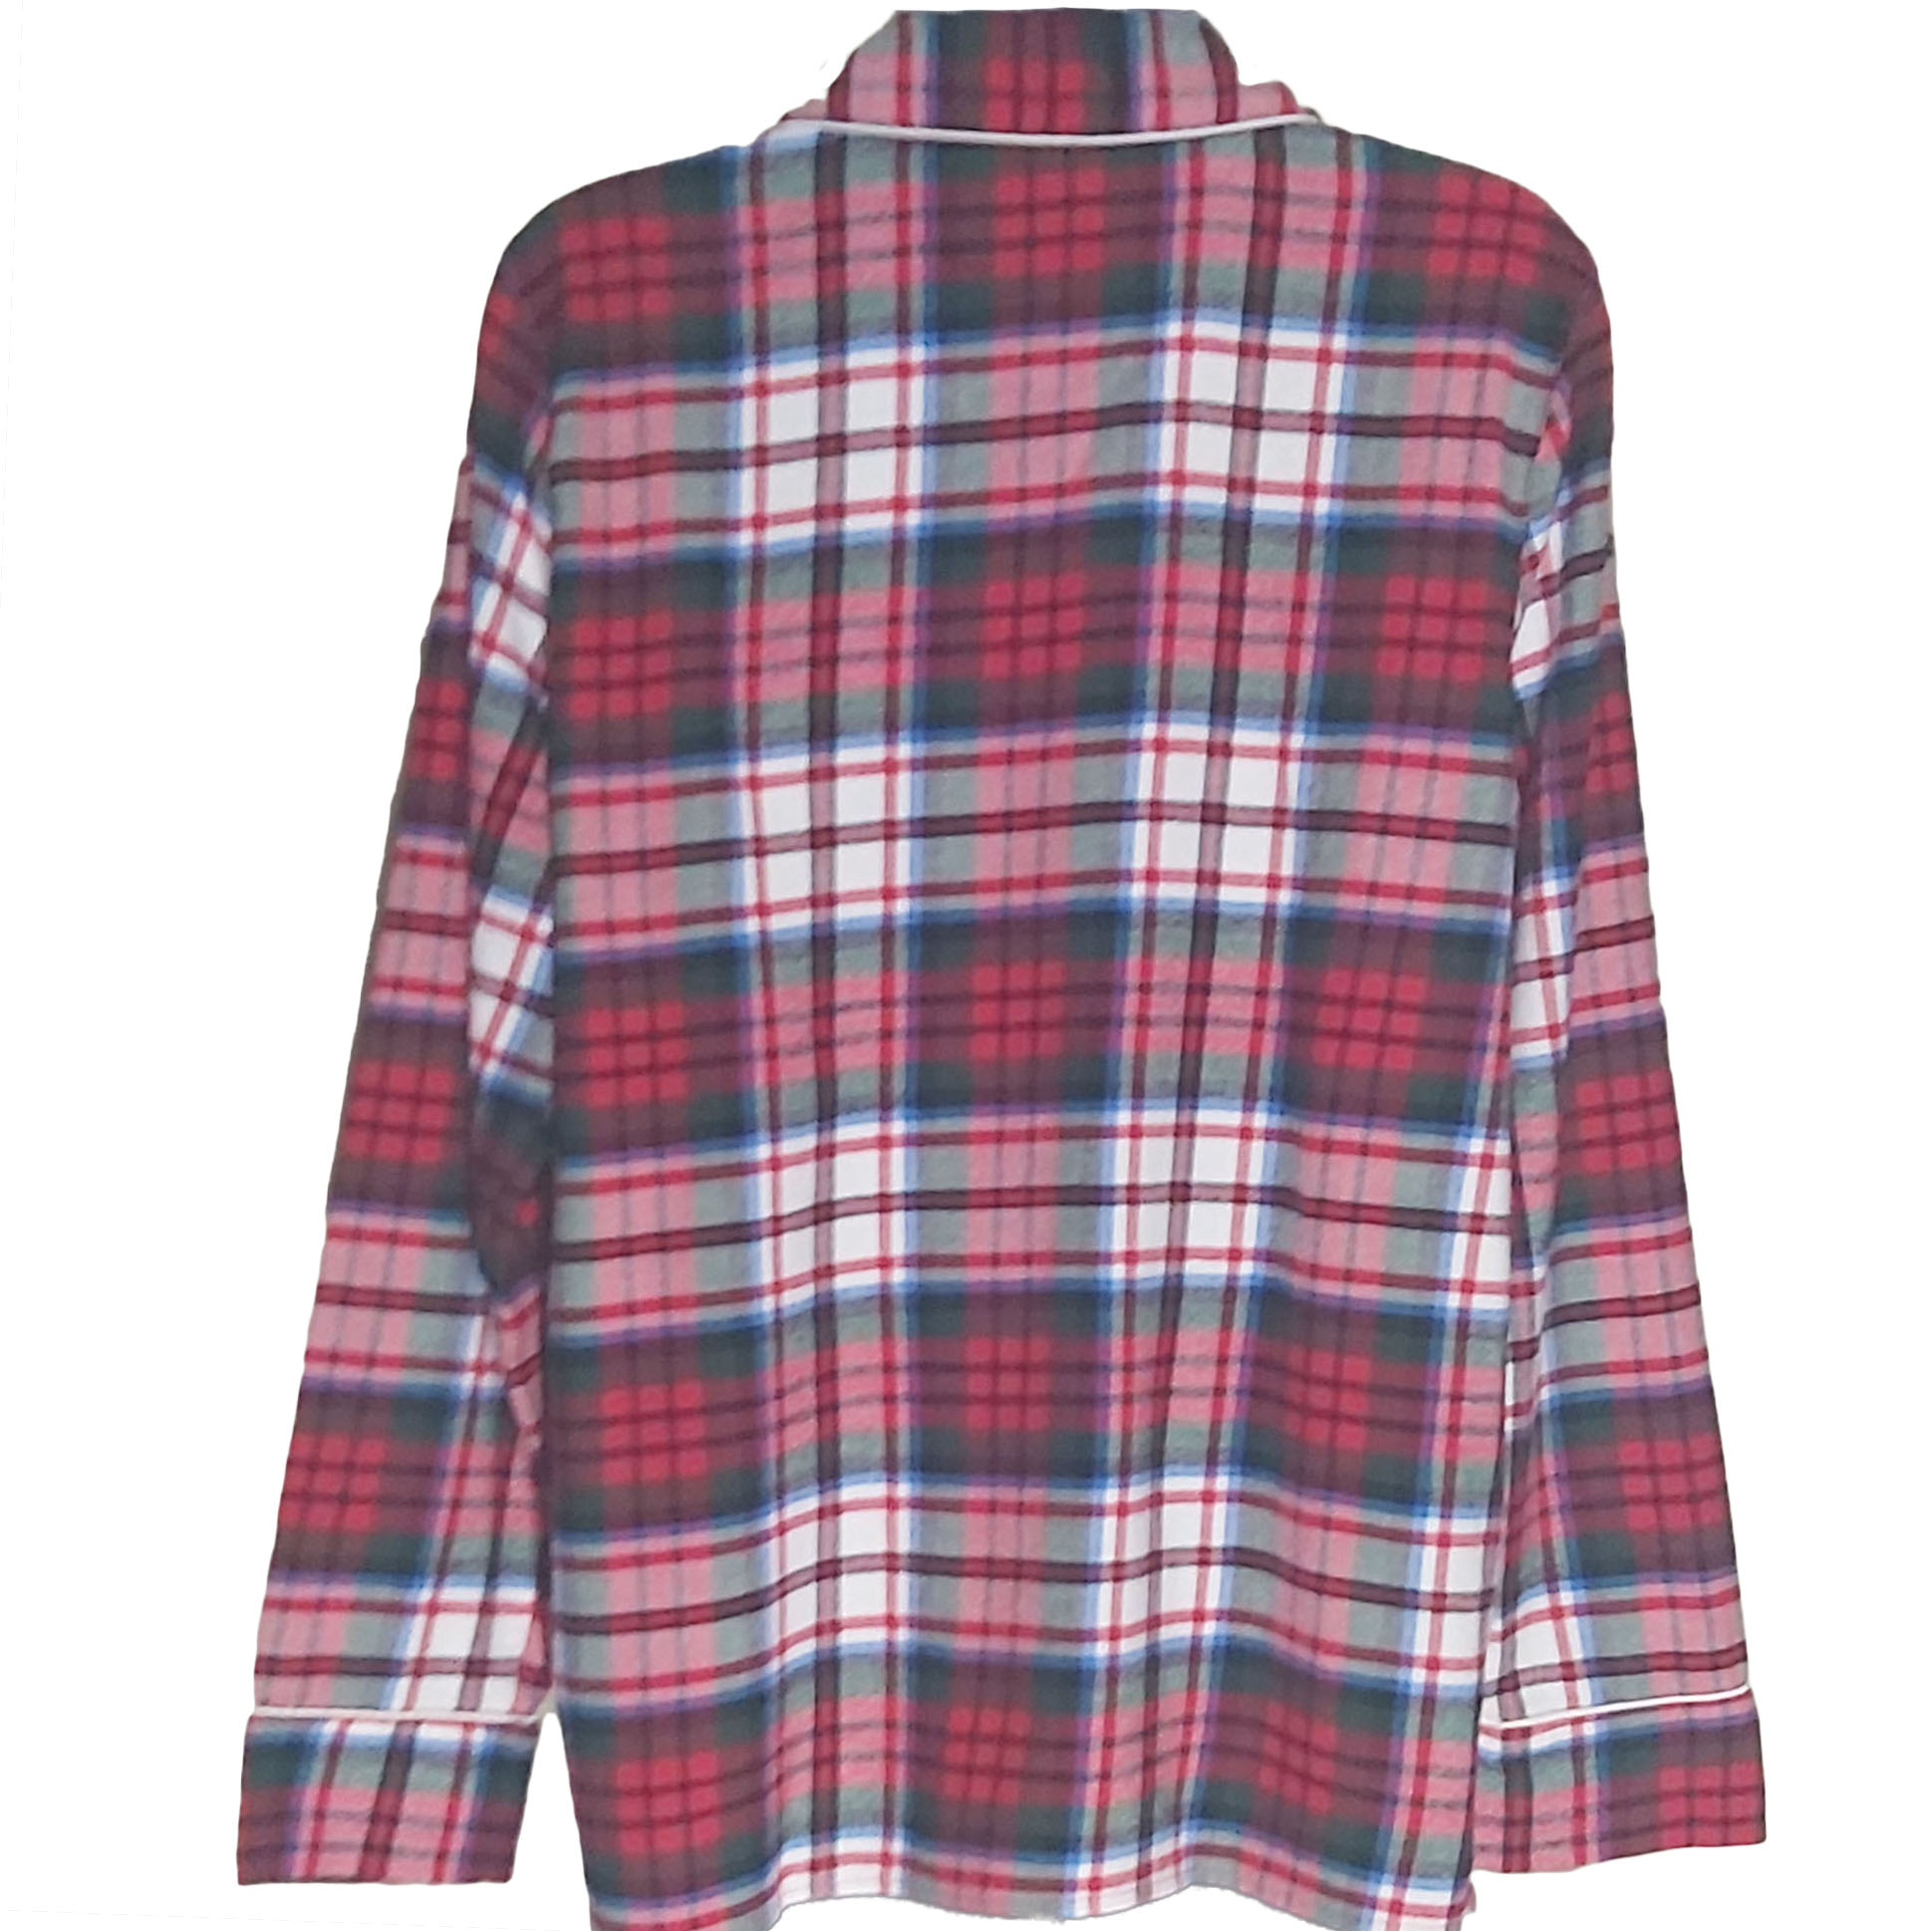 Lands' End Women's Small (6-8) Long Sleeve Flannel Pajama Top, Ivory Red Plaid